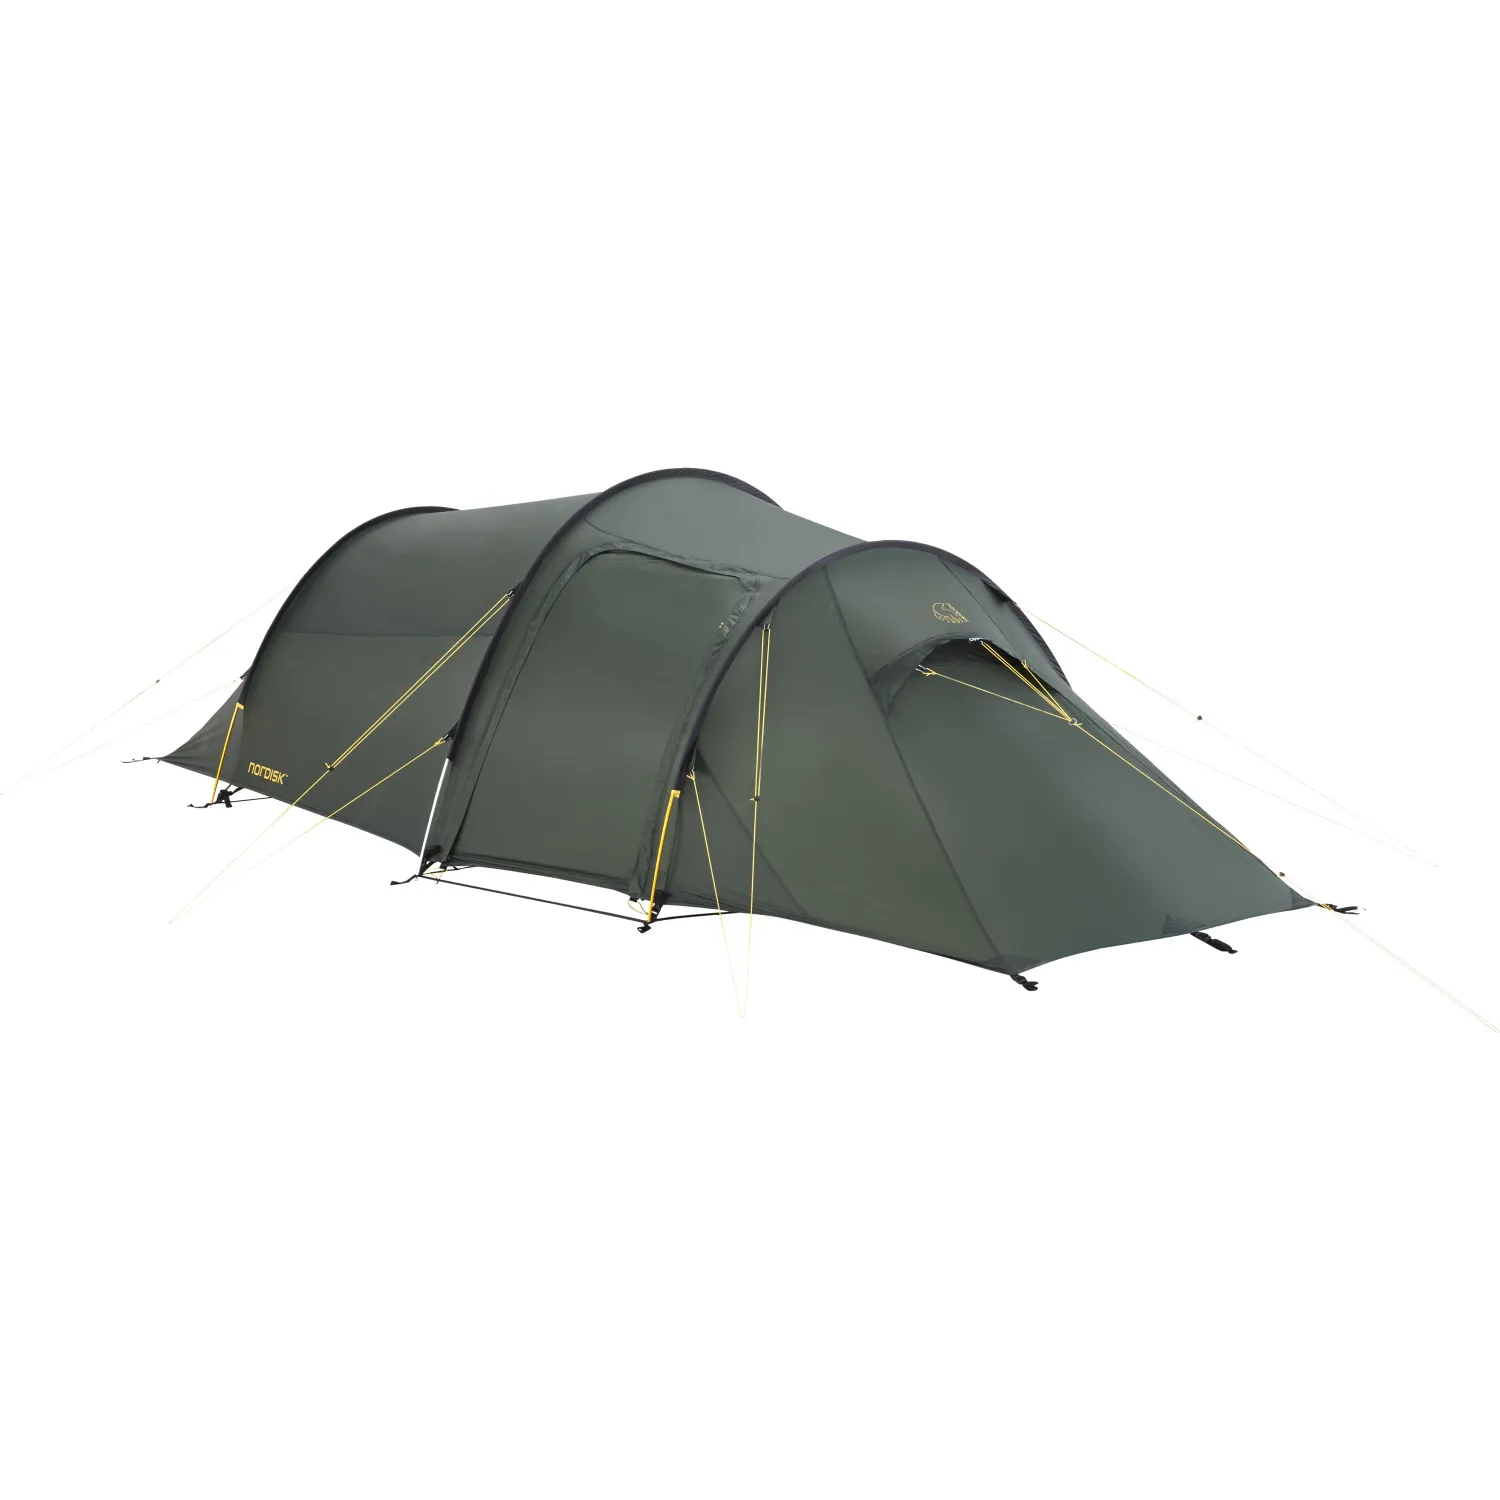 Oppland-2-si-112032-nordisk-classic-tunnel-two-man-tent-forest-green-1.jpg